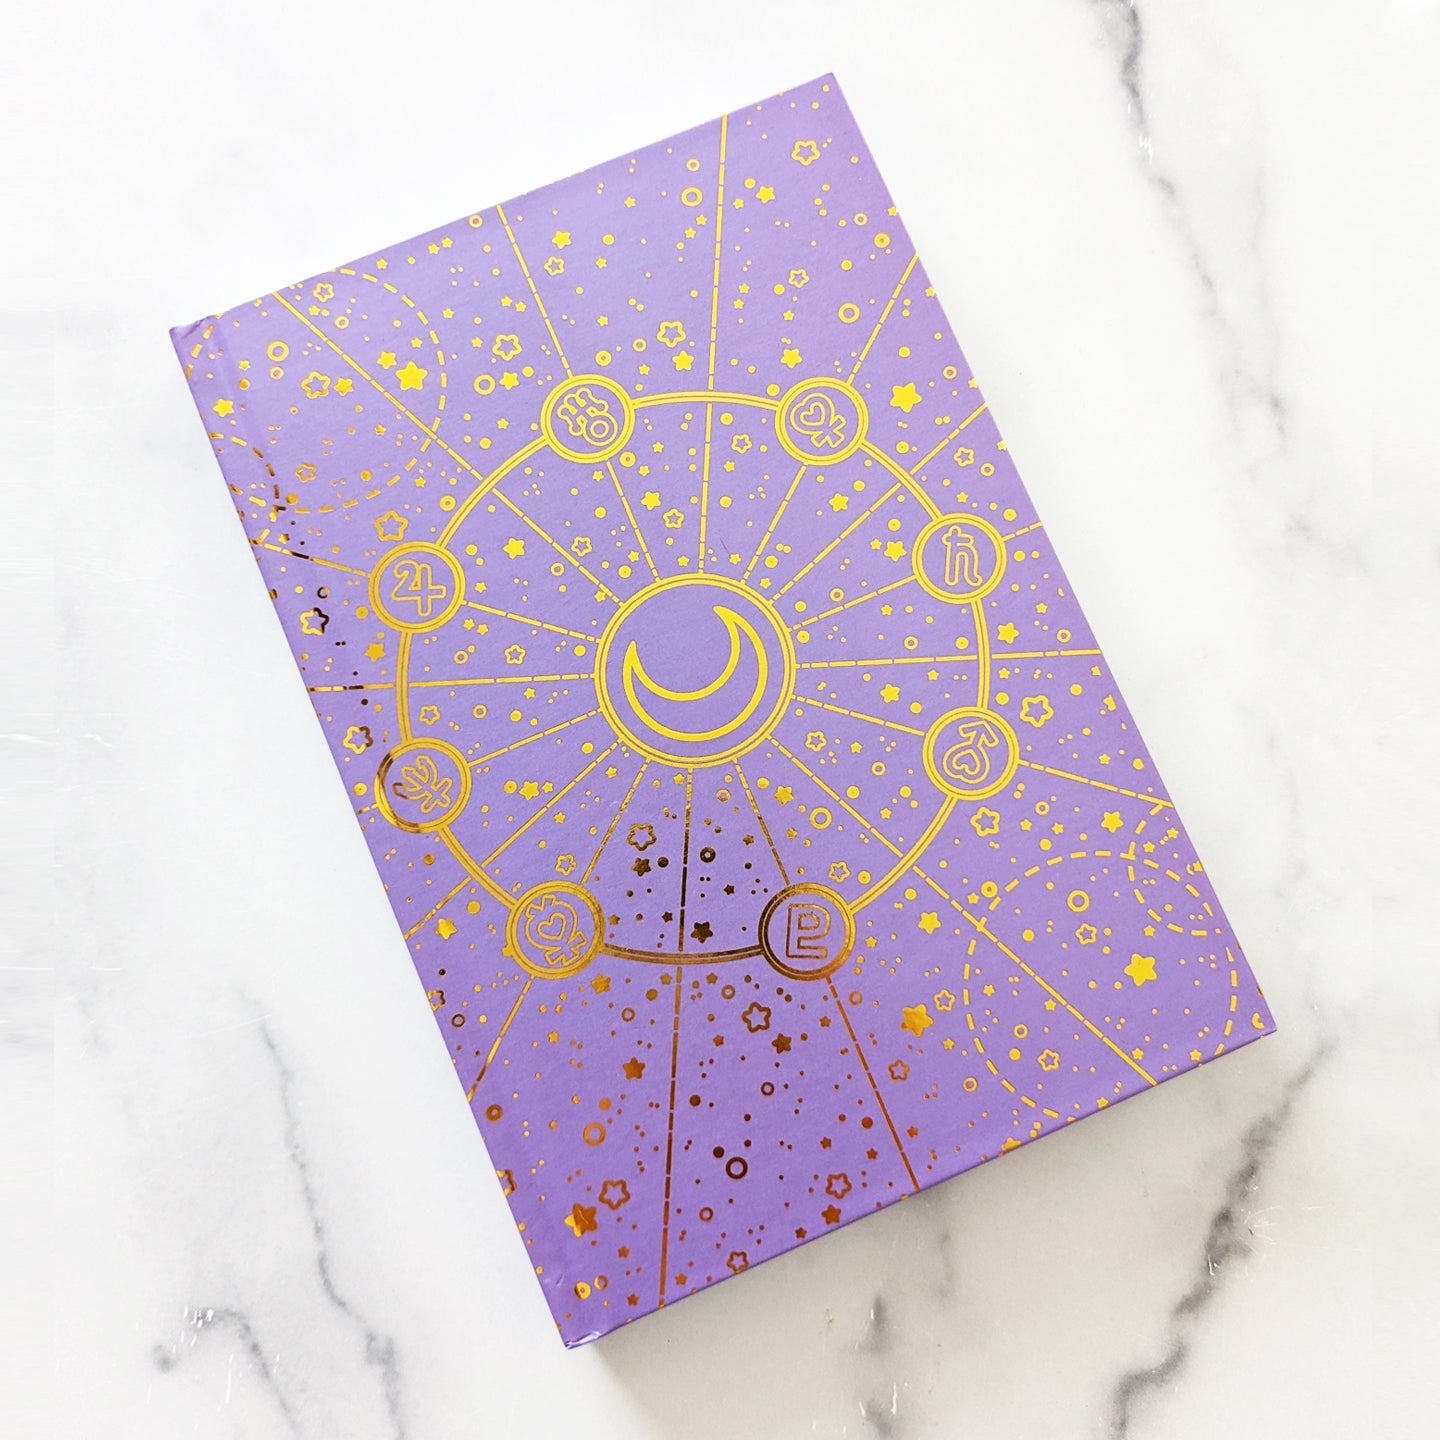 An Astrologist's Hardcovered Notebook, Gold Foil